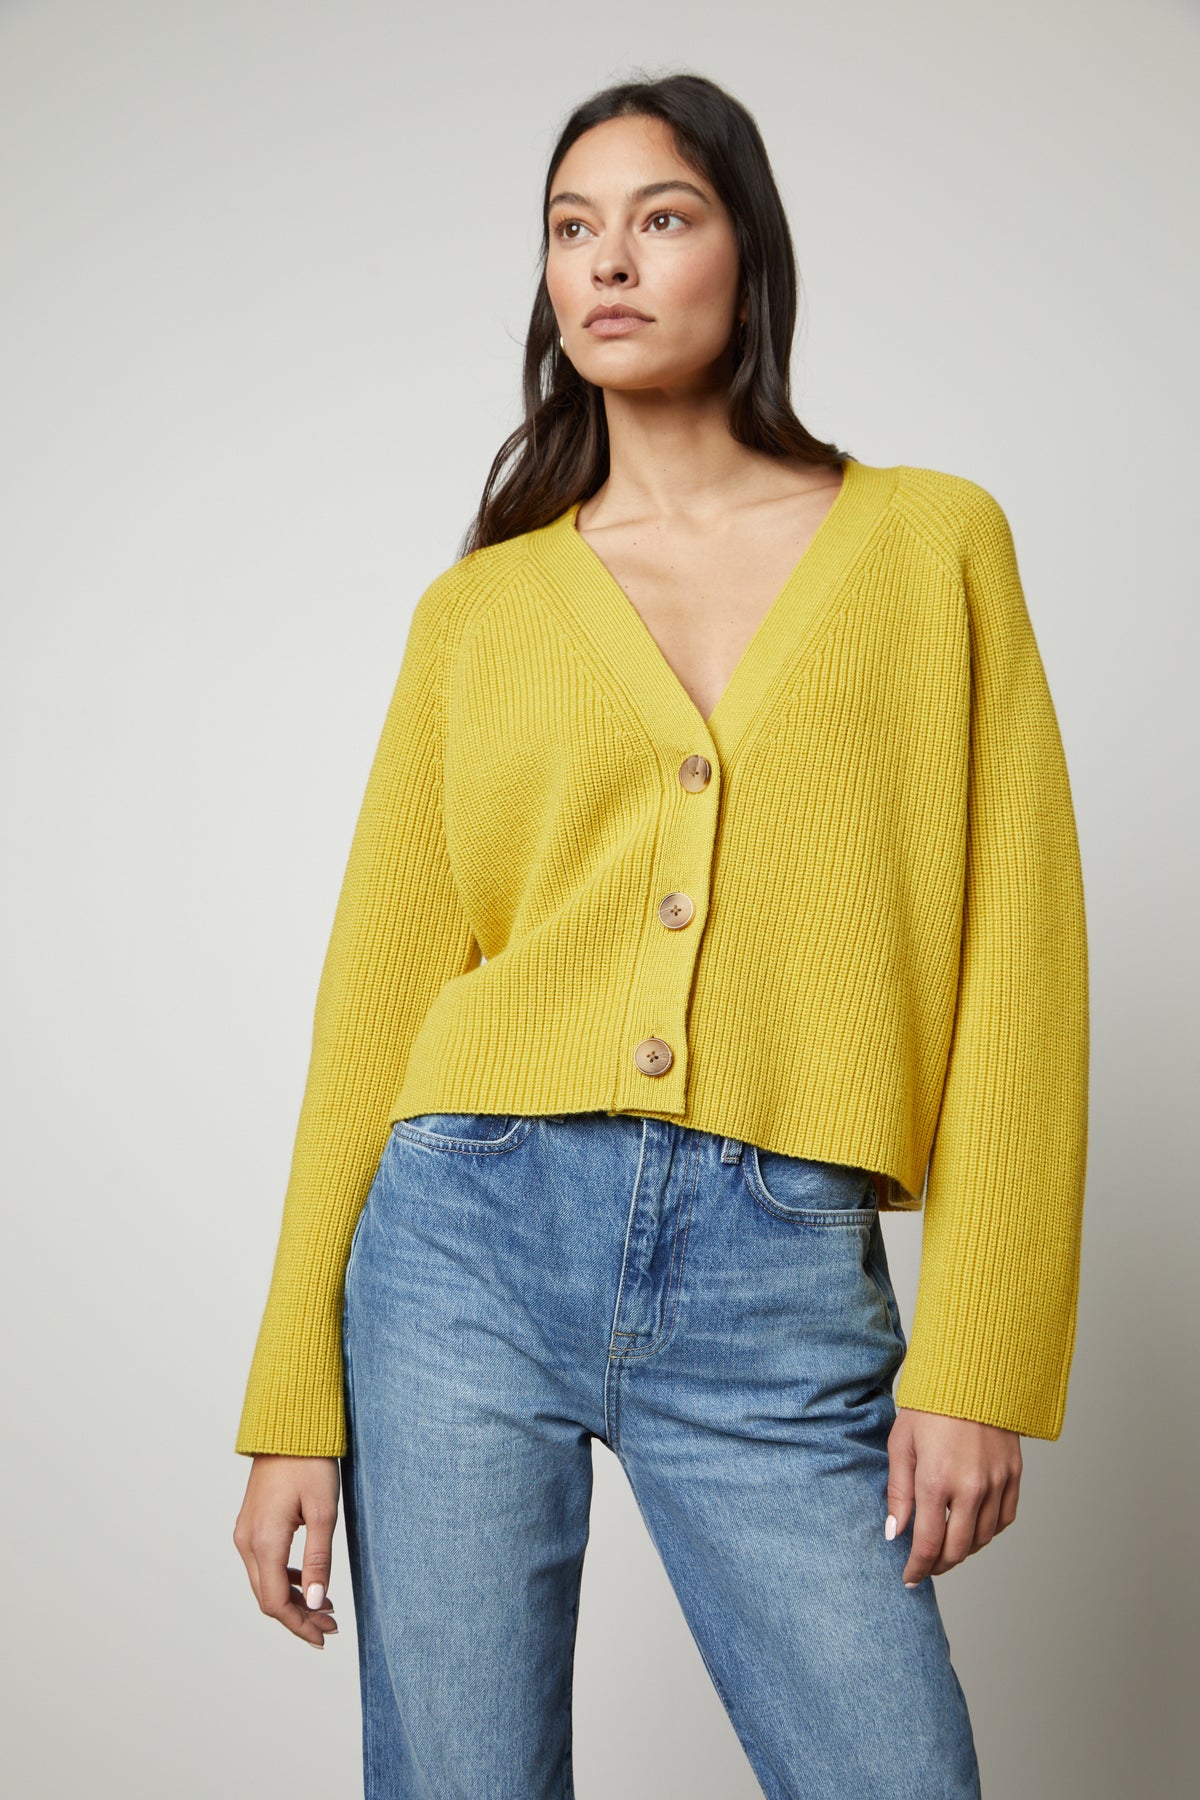 The model is wearing a yellow Marilyn Button Front Cardigan by Velvet by Graham & Spencer and jeans.-26727747059905